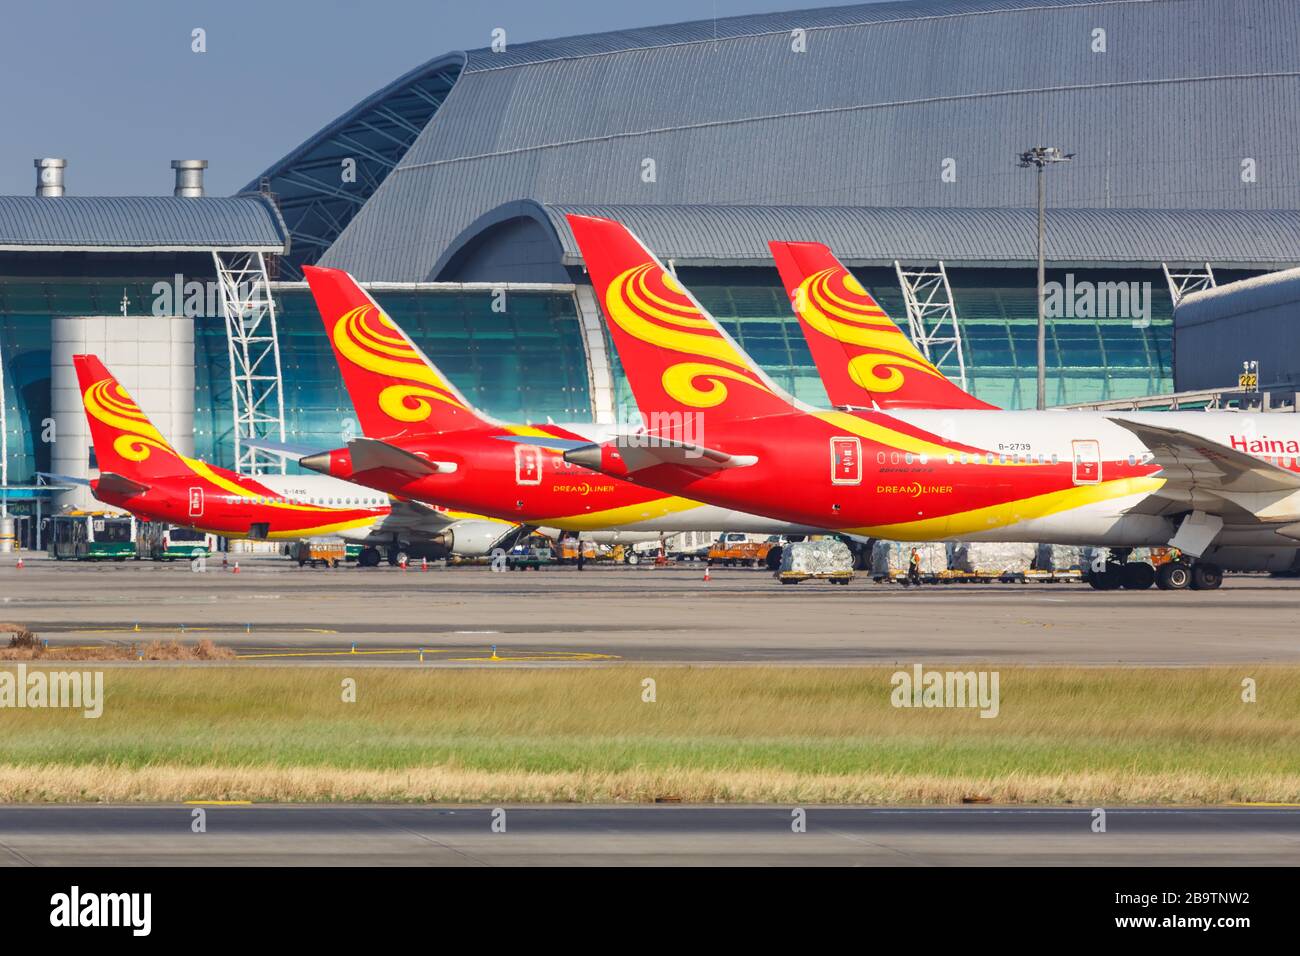 Guangzhou, China – September 23, 2019: Hainan Airlines airplanes Tails at Guangzhou airport (CAN) in China. Stock Photo